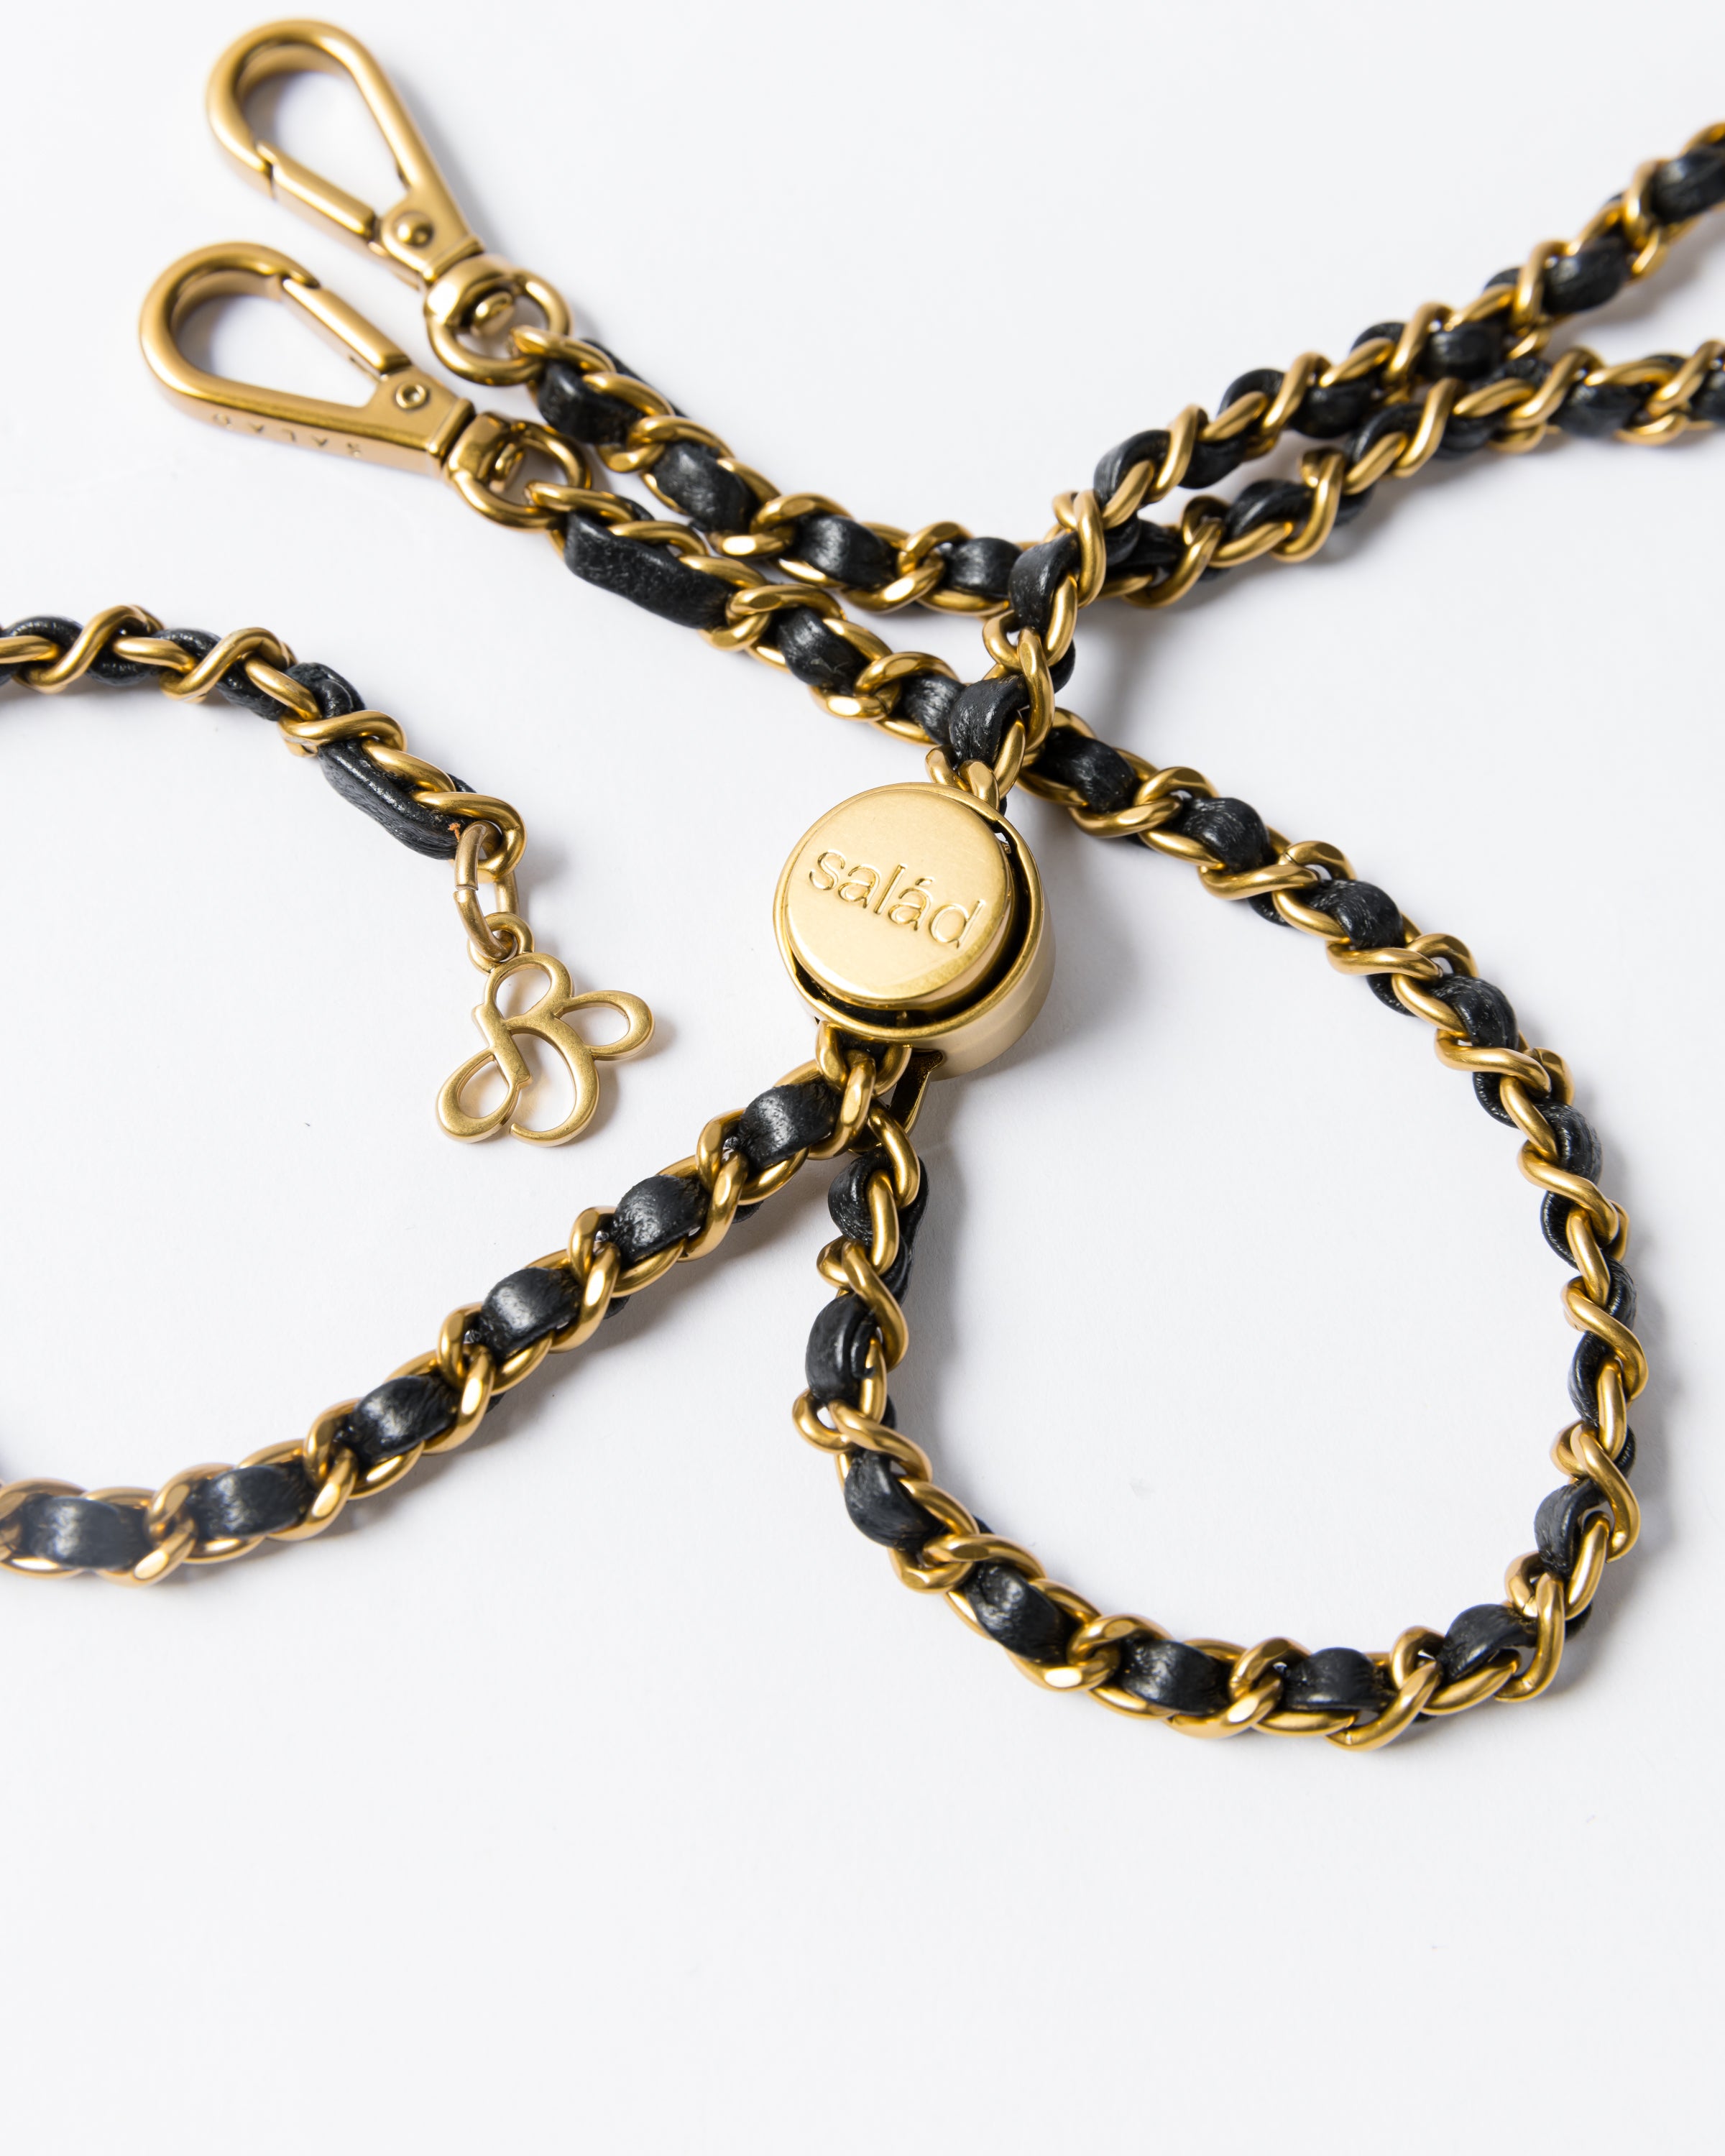 Salad Chain with leather pendant gold chain